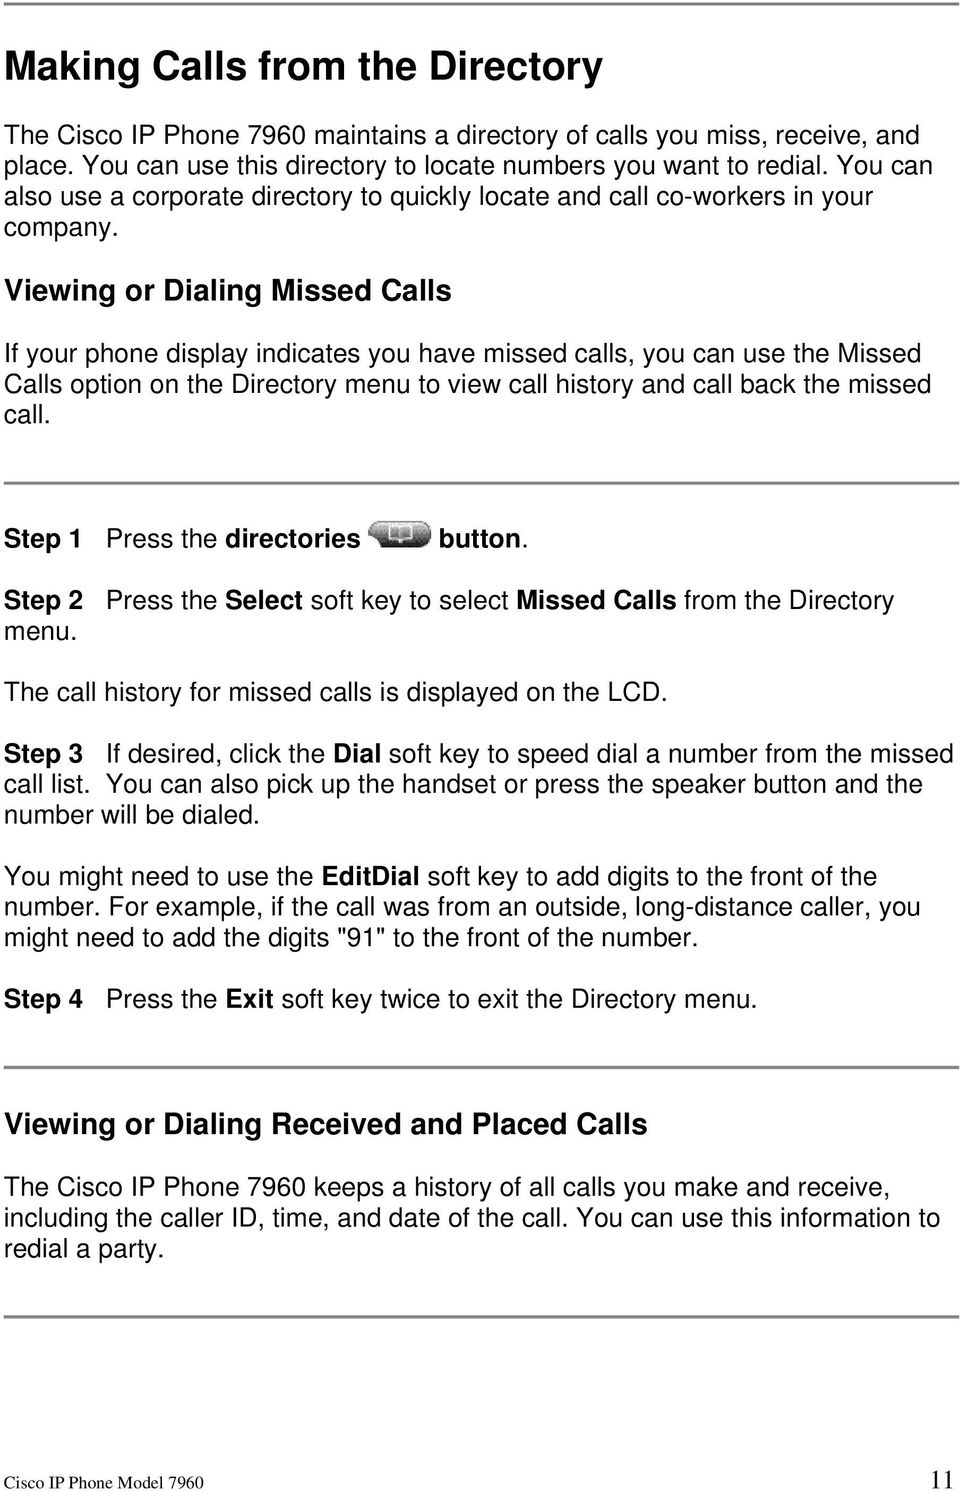 Viewing or Dialing Missed Calls If your phone display indicates you have missed calls, you can use the Missed Calls option on the Directory menu to view call history and call back the missed call.